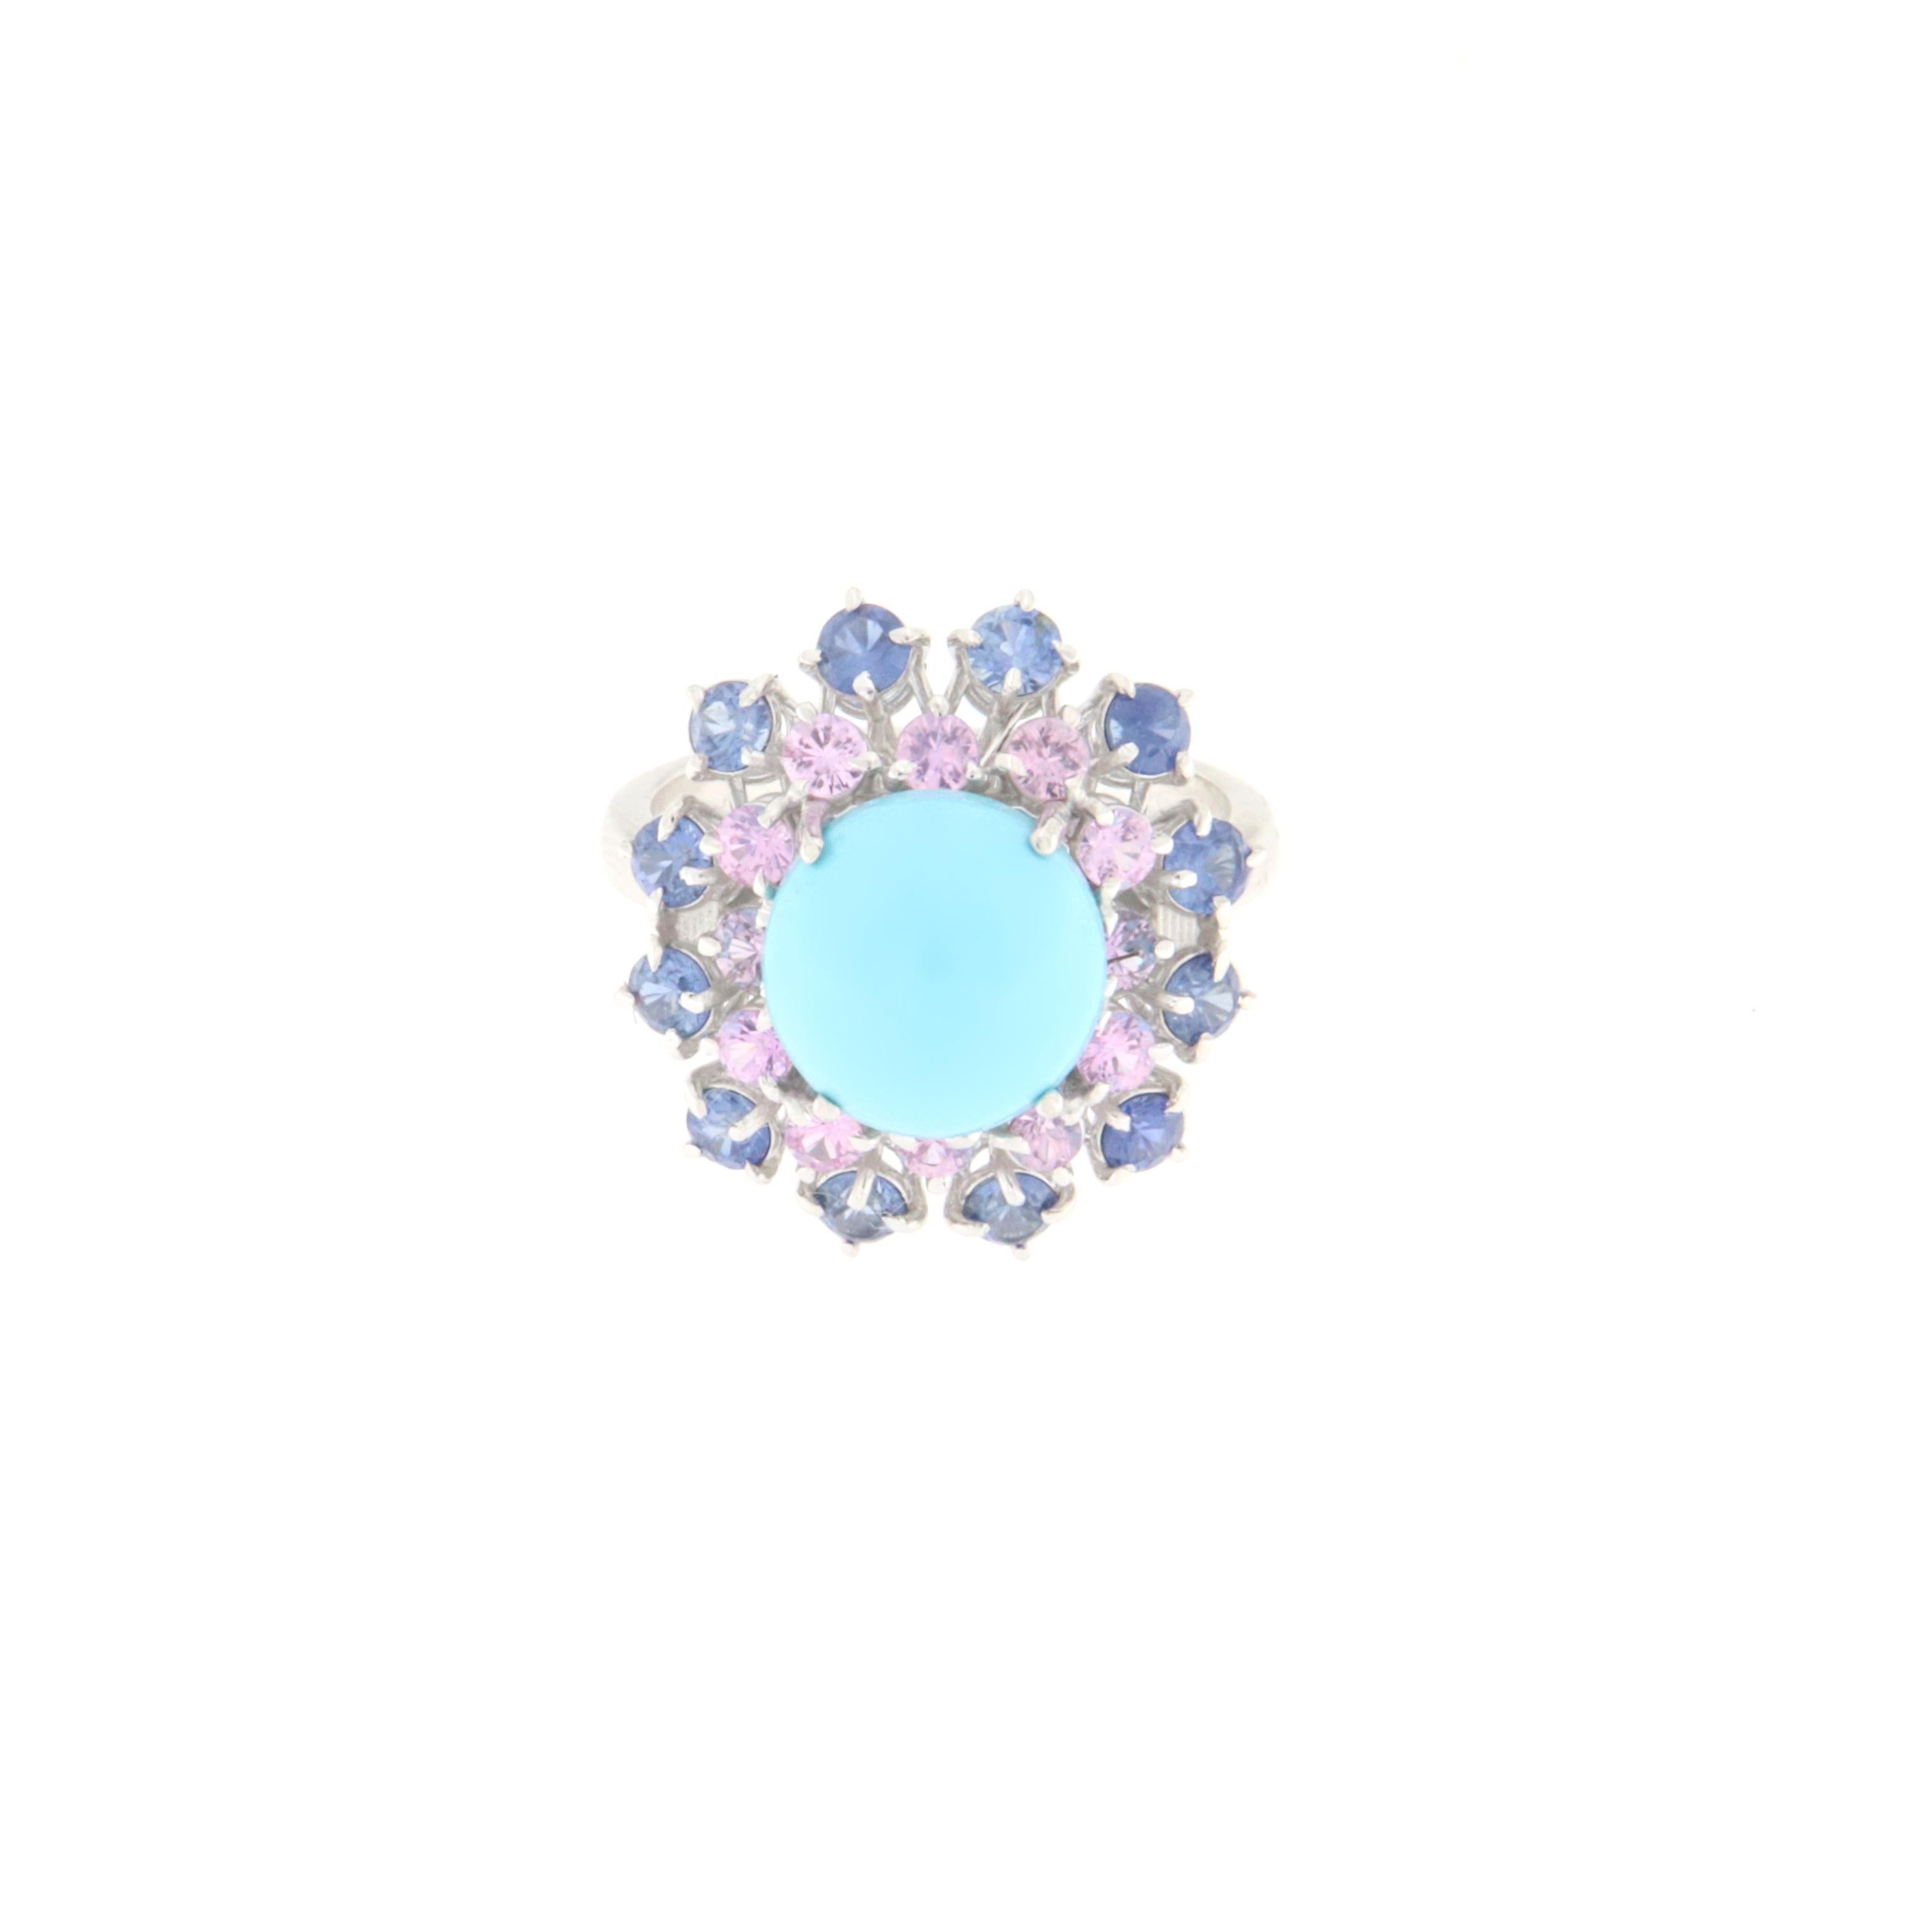 Fantastic ring made of 18 carat white gold with blue and pink sapphires,natural turquoise, entirely handmade by expert craftsmen in the sector.
The turquoise present on the ring recalls the colors of the sea and evokes the arrival of summer, making